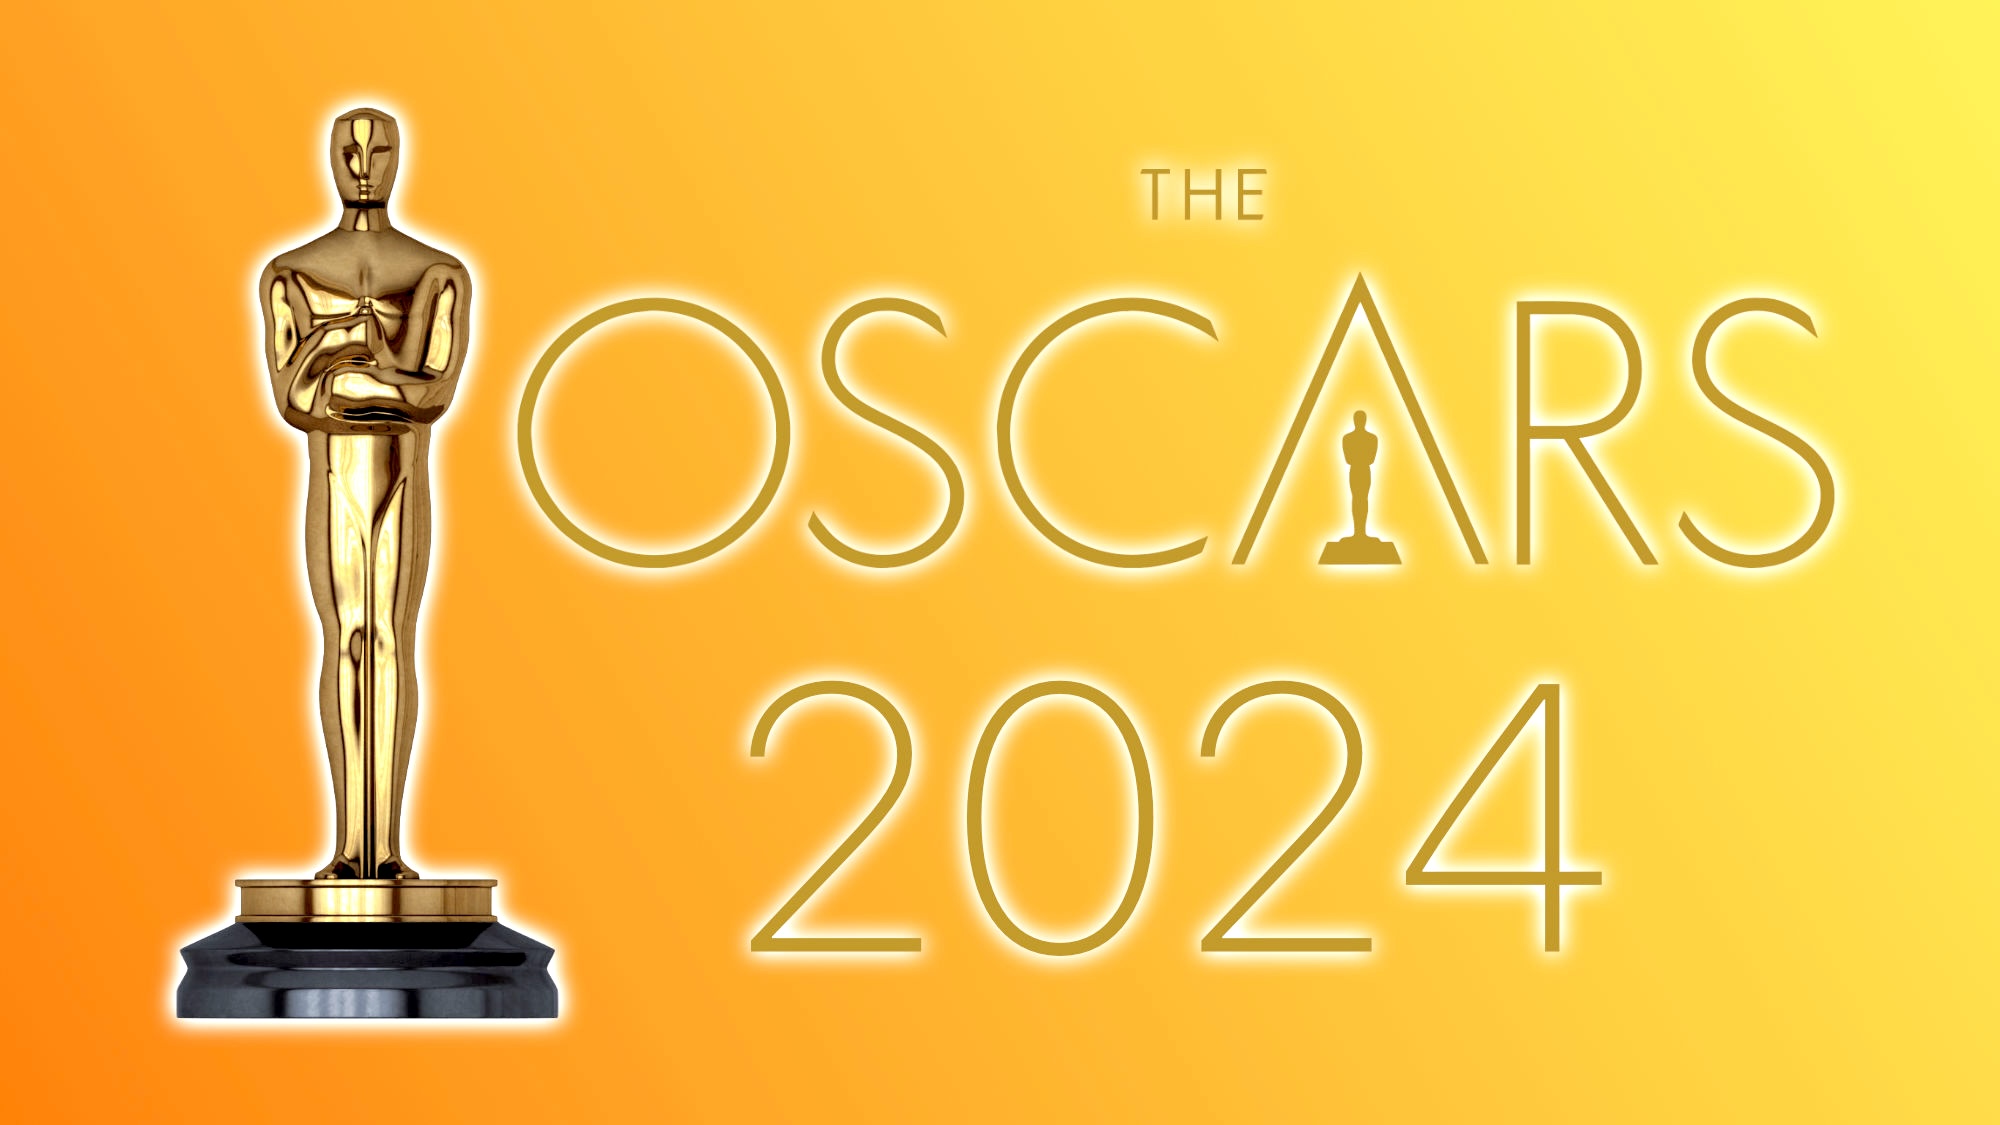 The Oscars 2024: Date, How to Watch Them, Nominated Films, and more